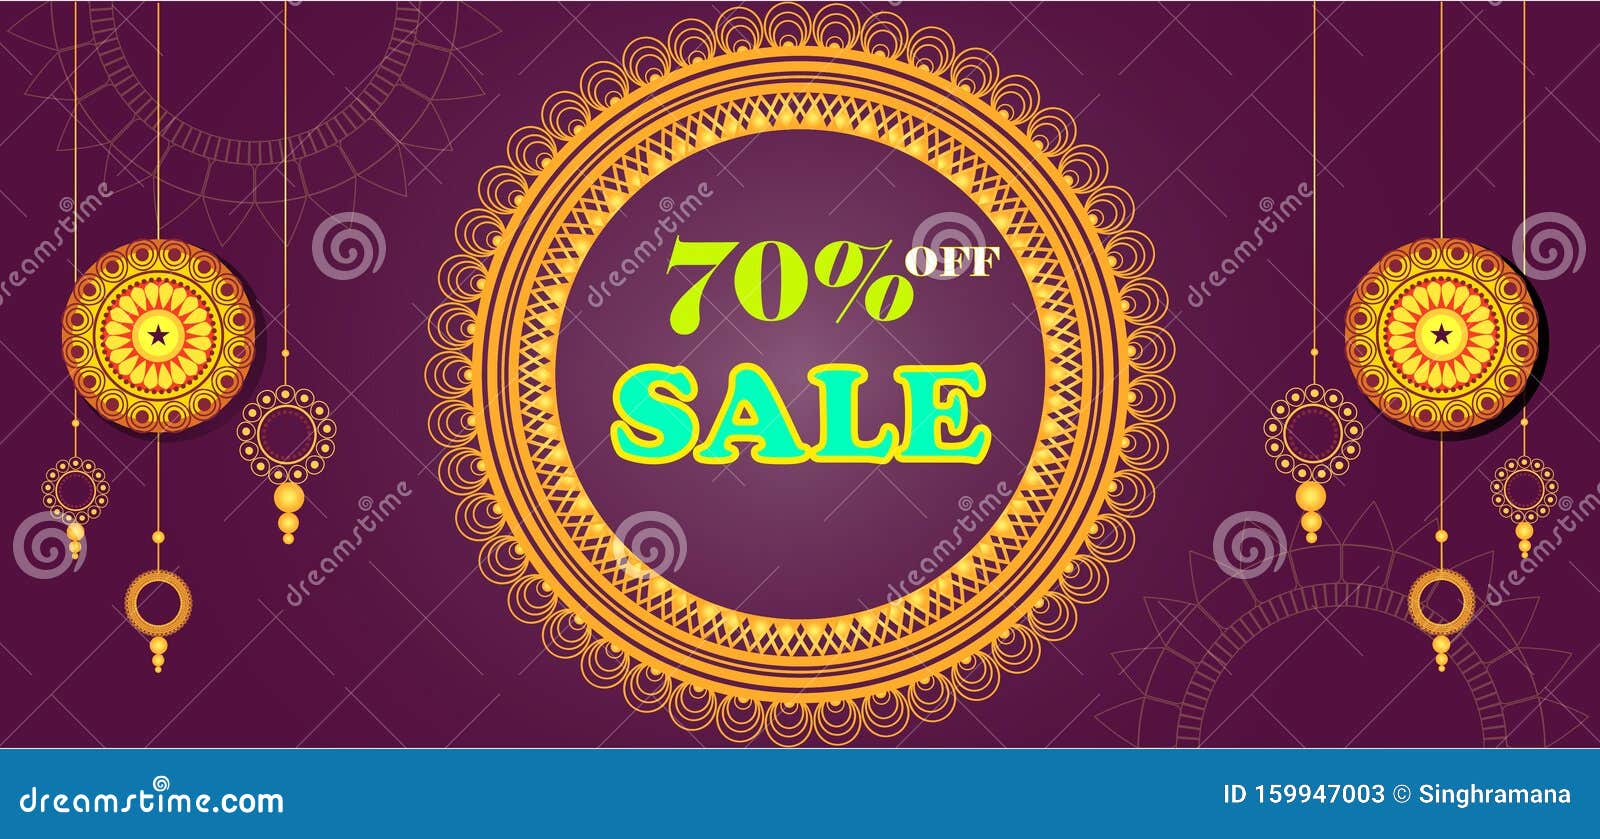 Easy To Edit Sample Cover Banner Background for Any Festival or Seasonable  Sale and Also Add Your Own Text To Wish or Greet. Best Stock Vector -  Illustration of background, happy: 159947003